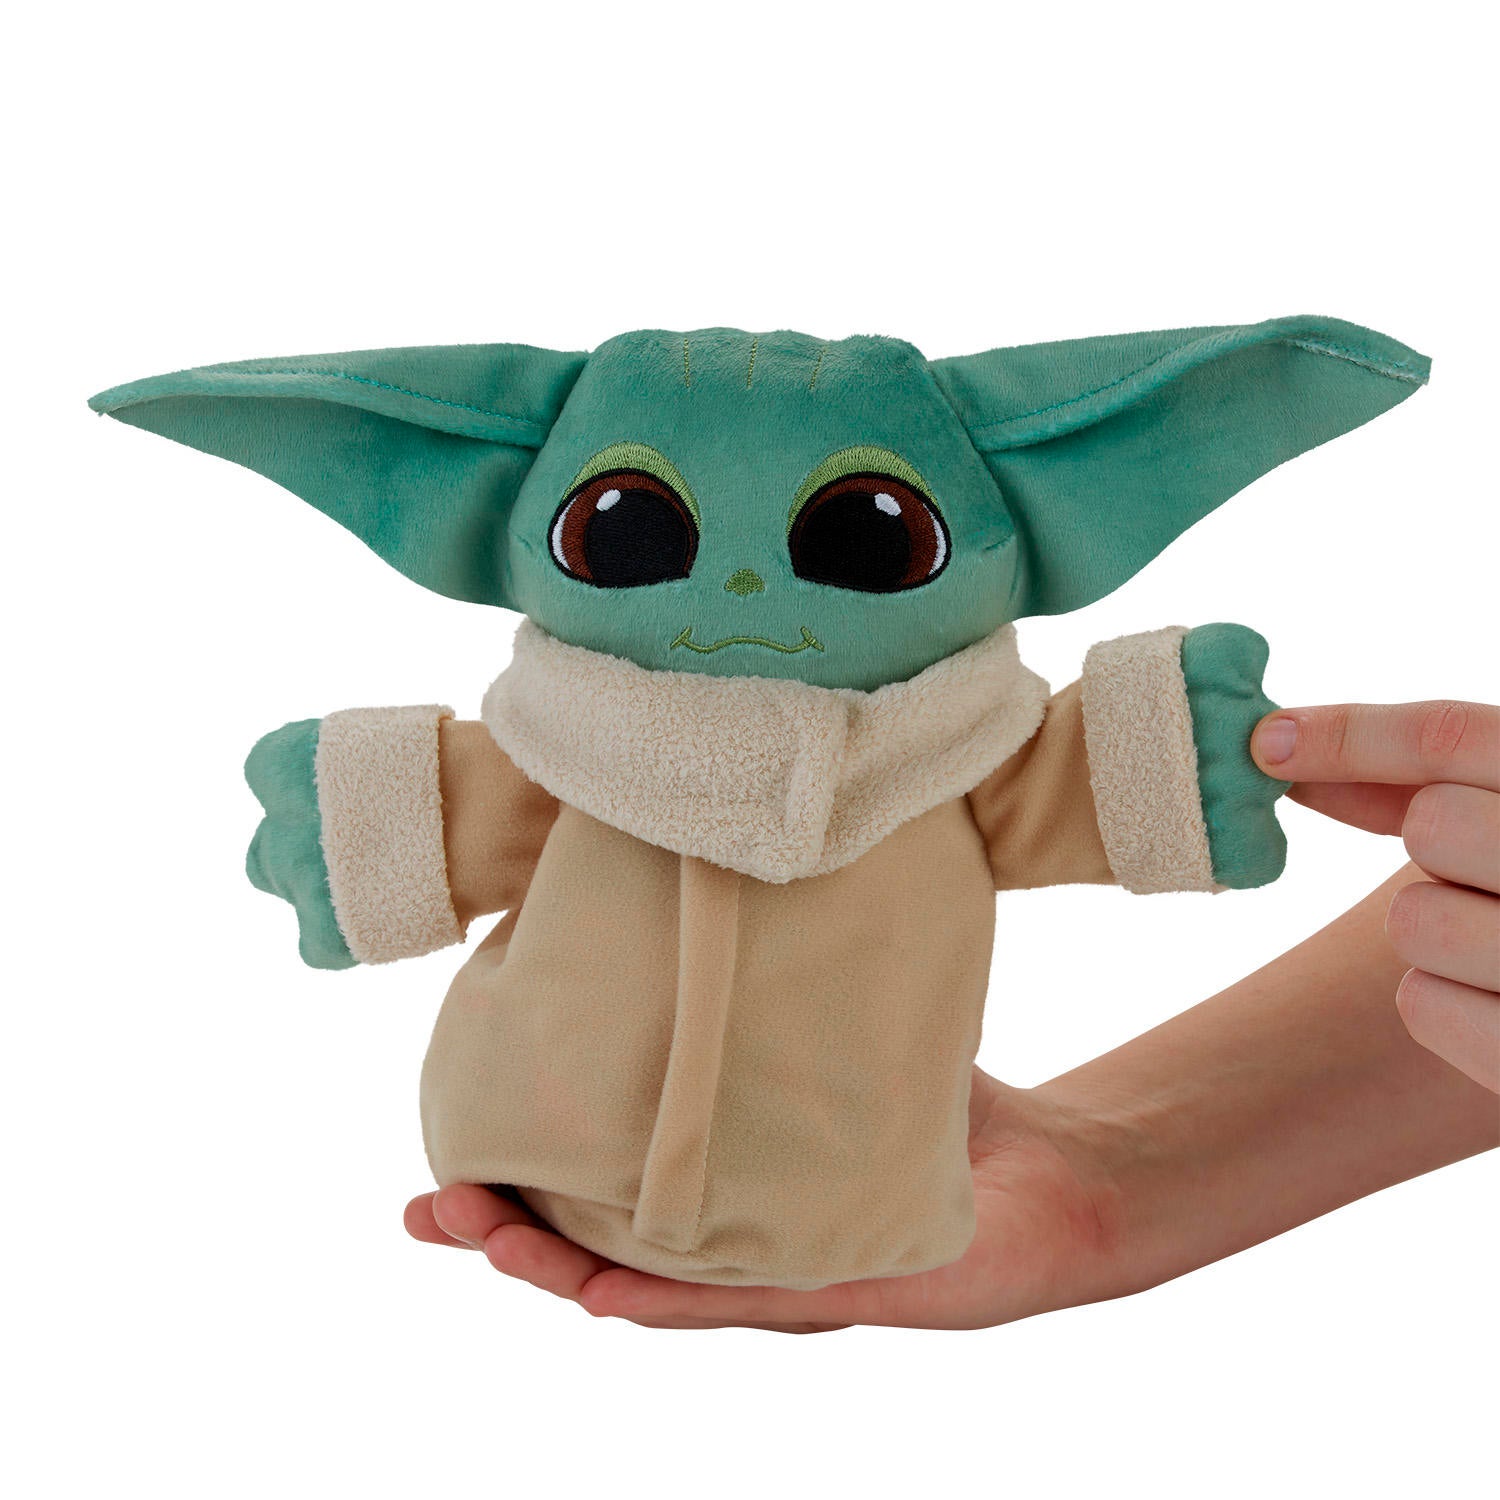 star-wars-the-bounty-collection-the-child-hideaway-hover-pram-plush-3-in-1-the-mandalorian-toy-1-copy.jpg